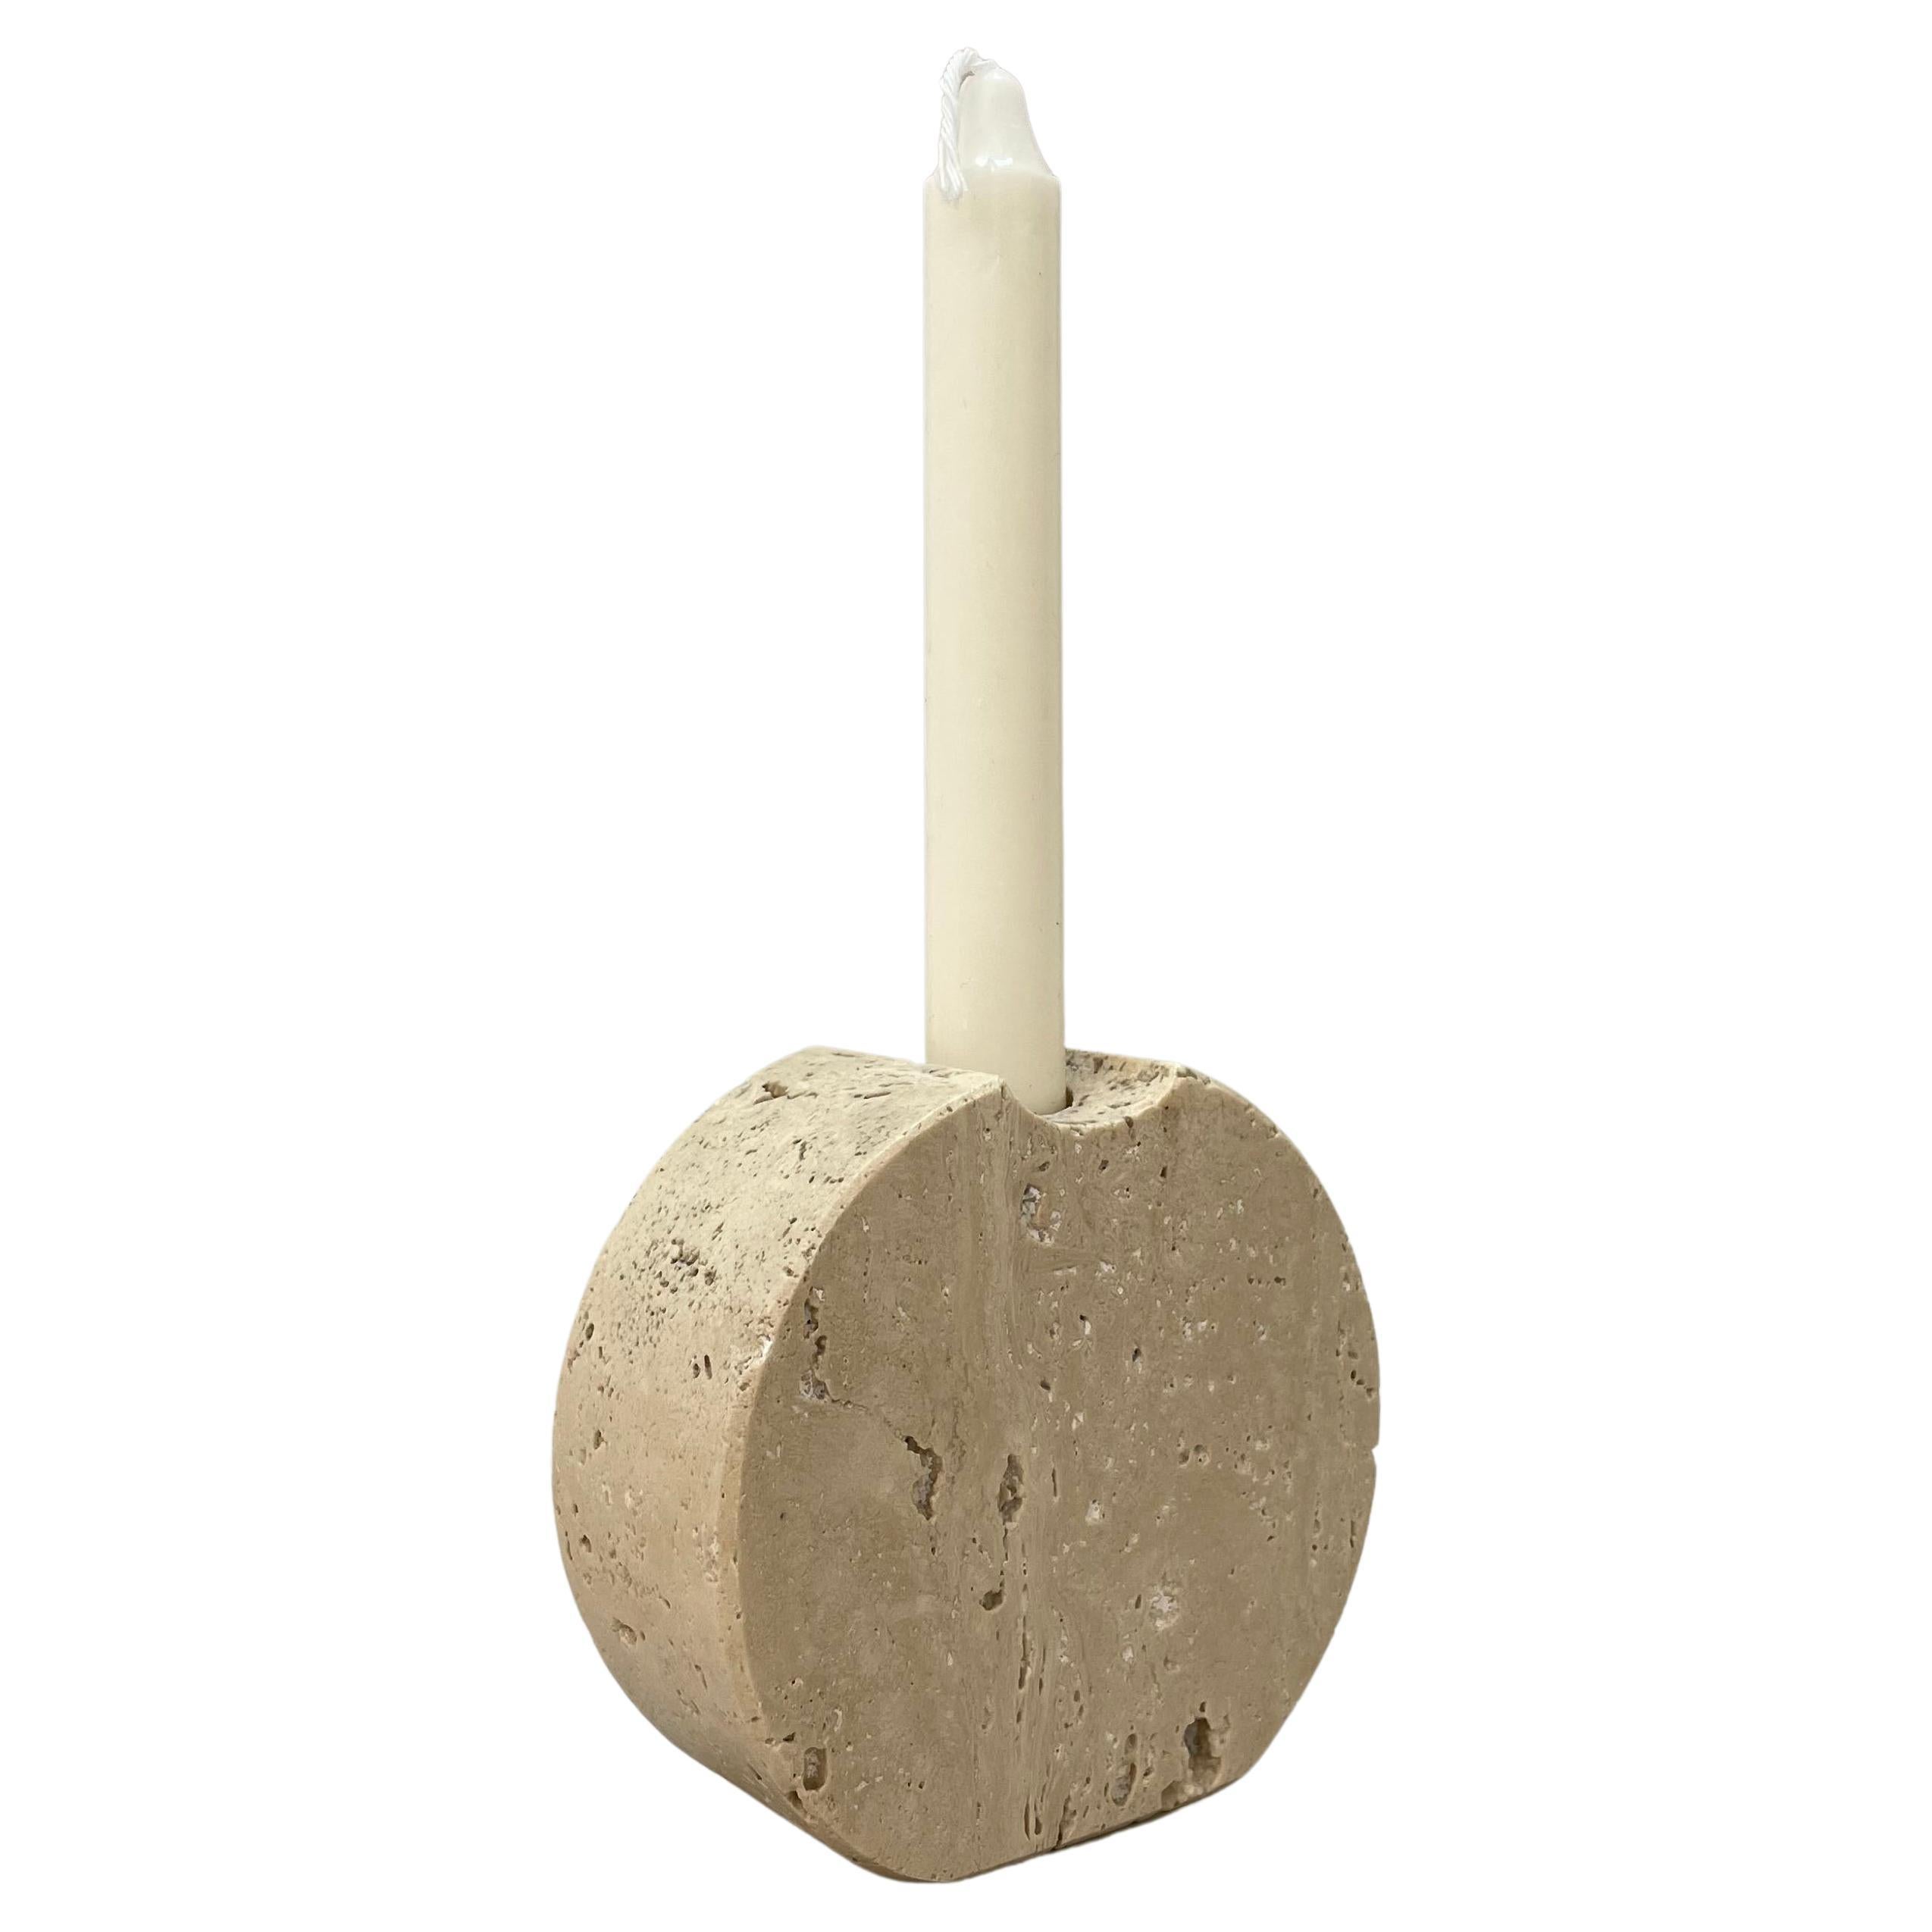 Elegant midcentury white travertine marble candleholder. This fantastic piece was designed in Italy during the 1970s by Fratelli Mannelli.

This item is perfect as the purity and the dominance of the material, white travertine marble, is finely